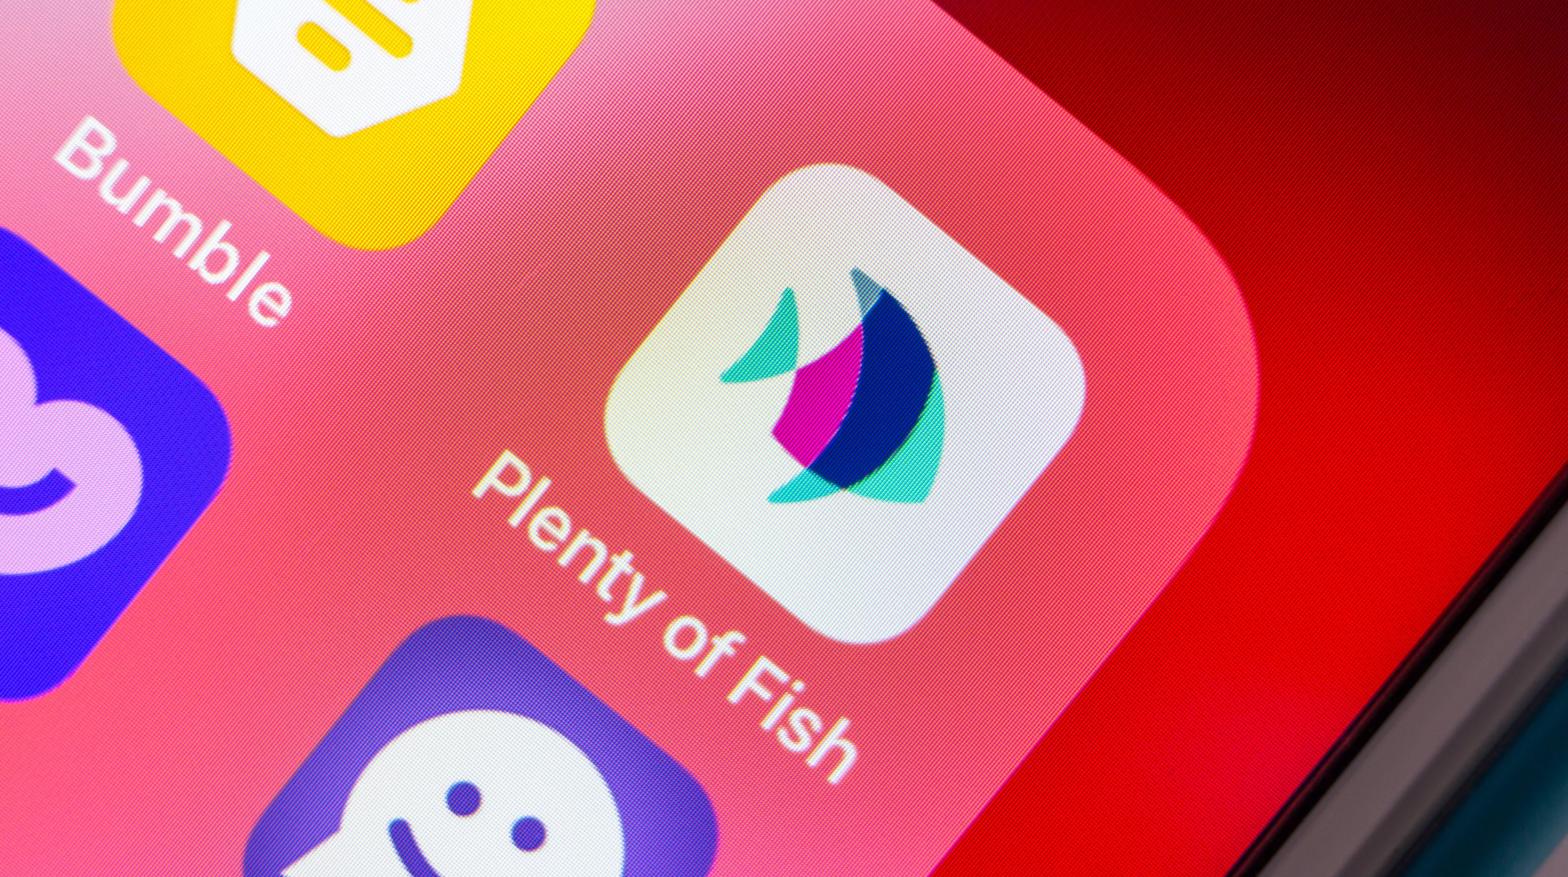 The 19-year-old dating app is competing against the likes of romance juggernauts Hinge, Tinder, and Bumble. (Image: Koshiro K, Shutterstock)